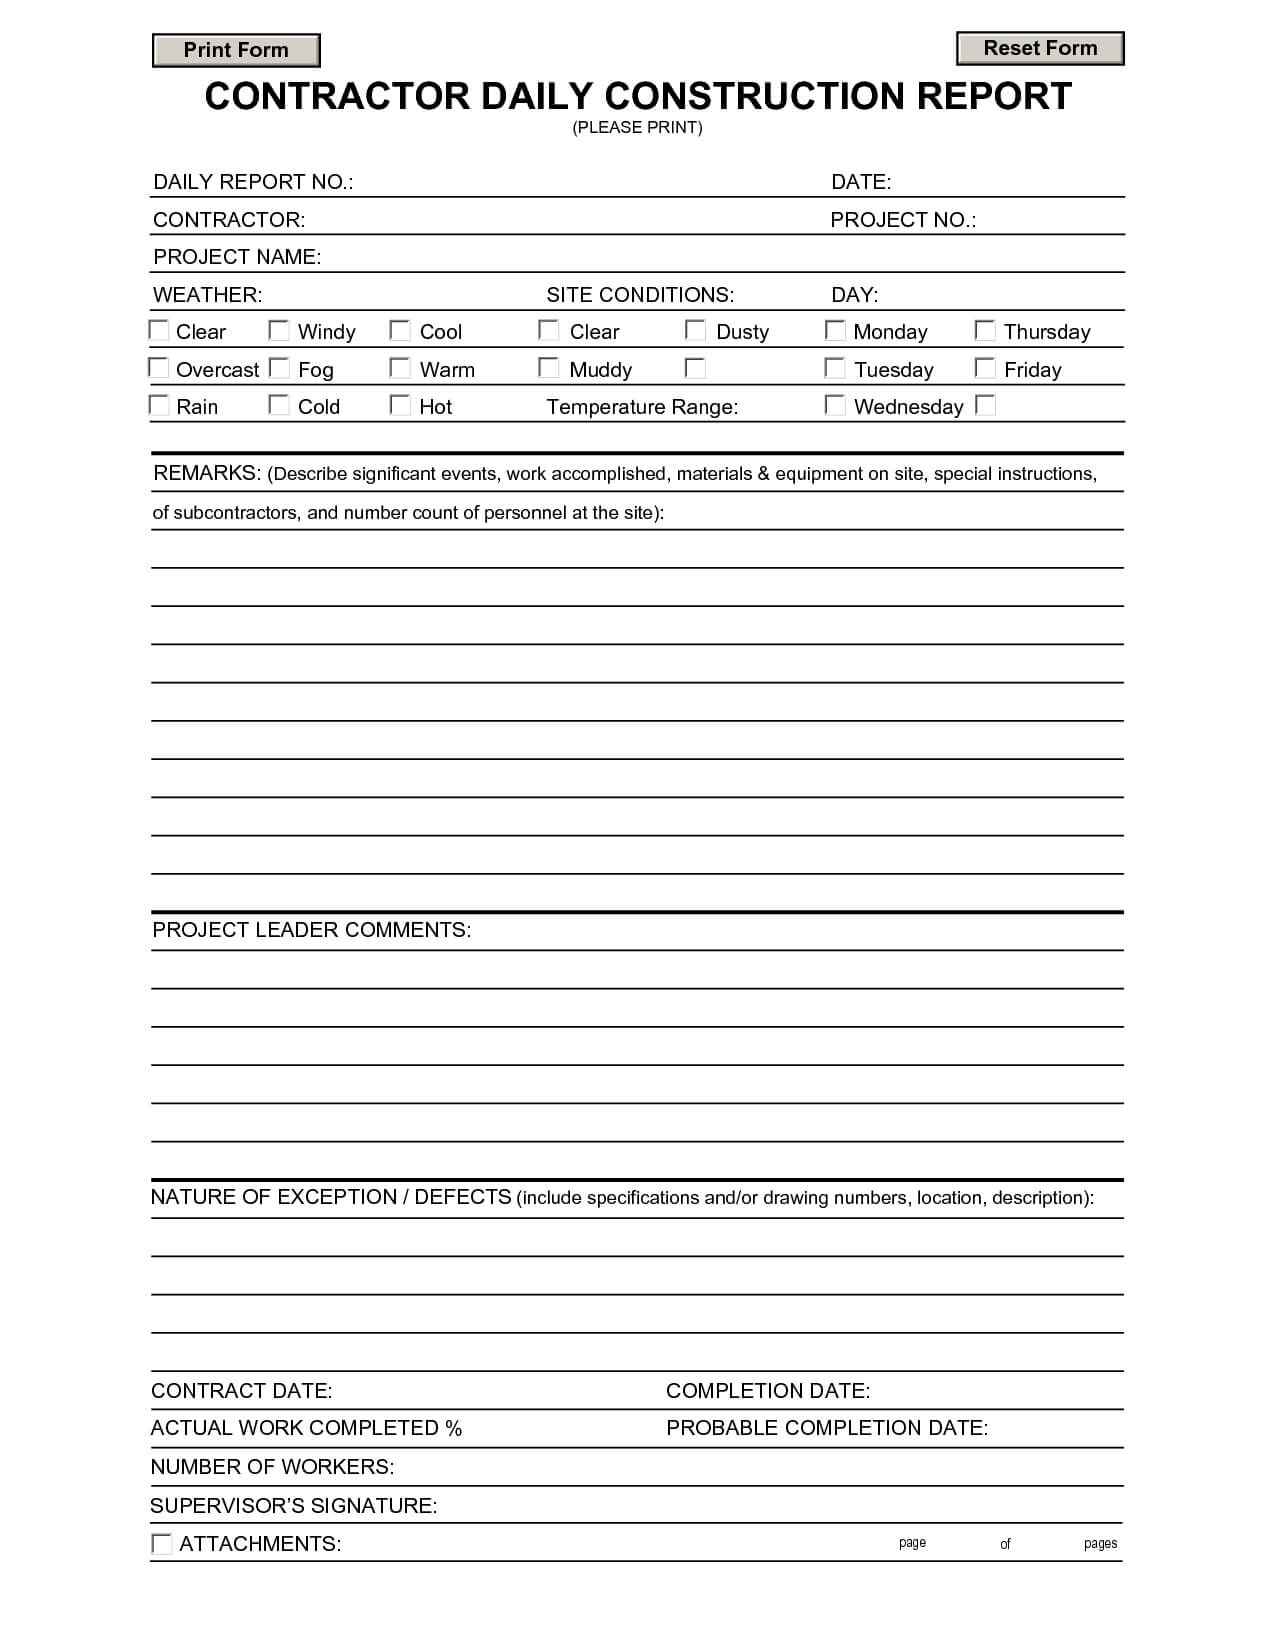 Construction Daily Report Template | Contractors | Report Throughout M&e Report Template